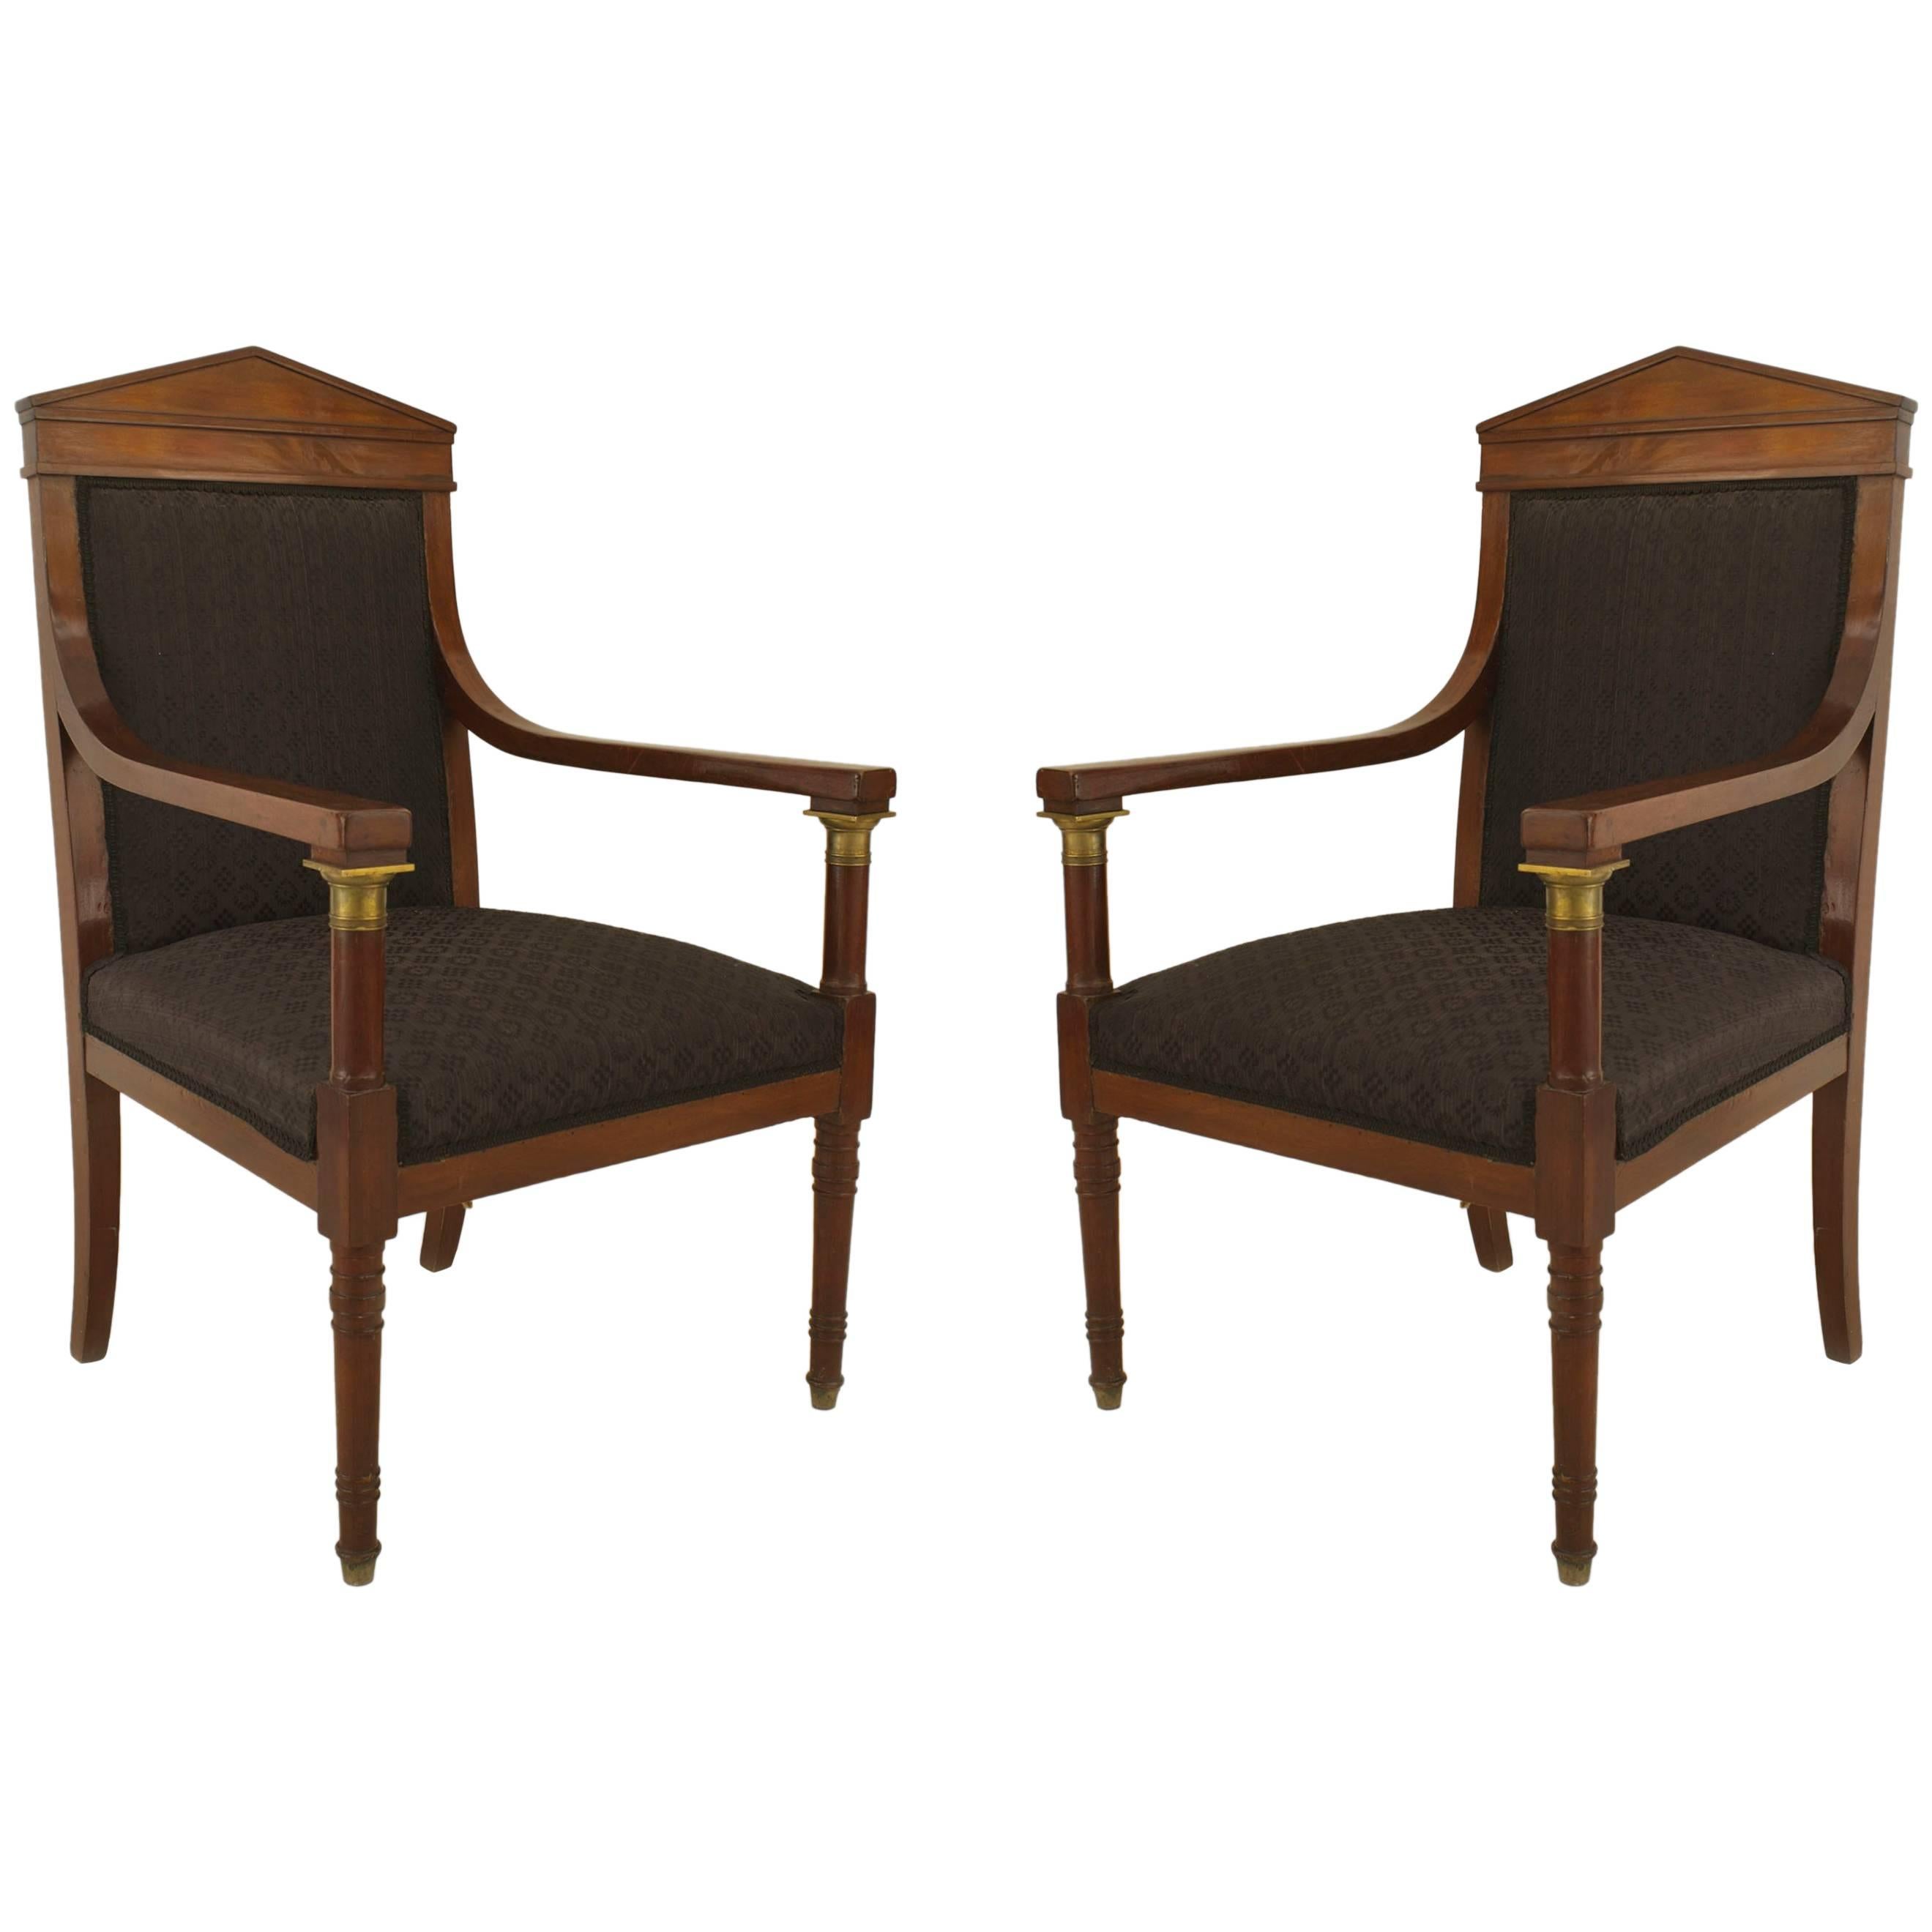 Pair of French Empire Mahogany Open Armchairs, 19th Century